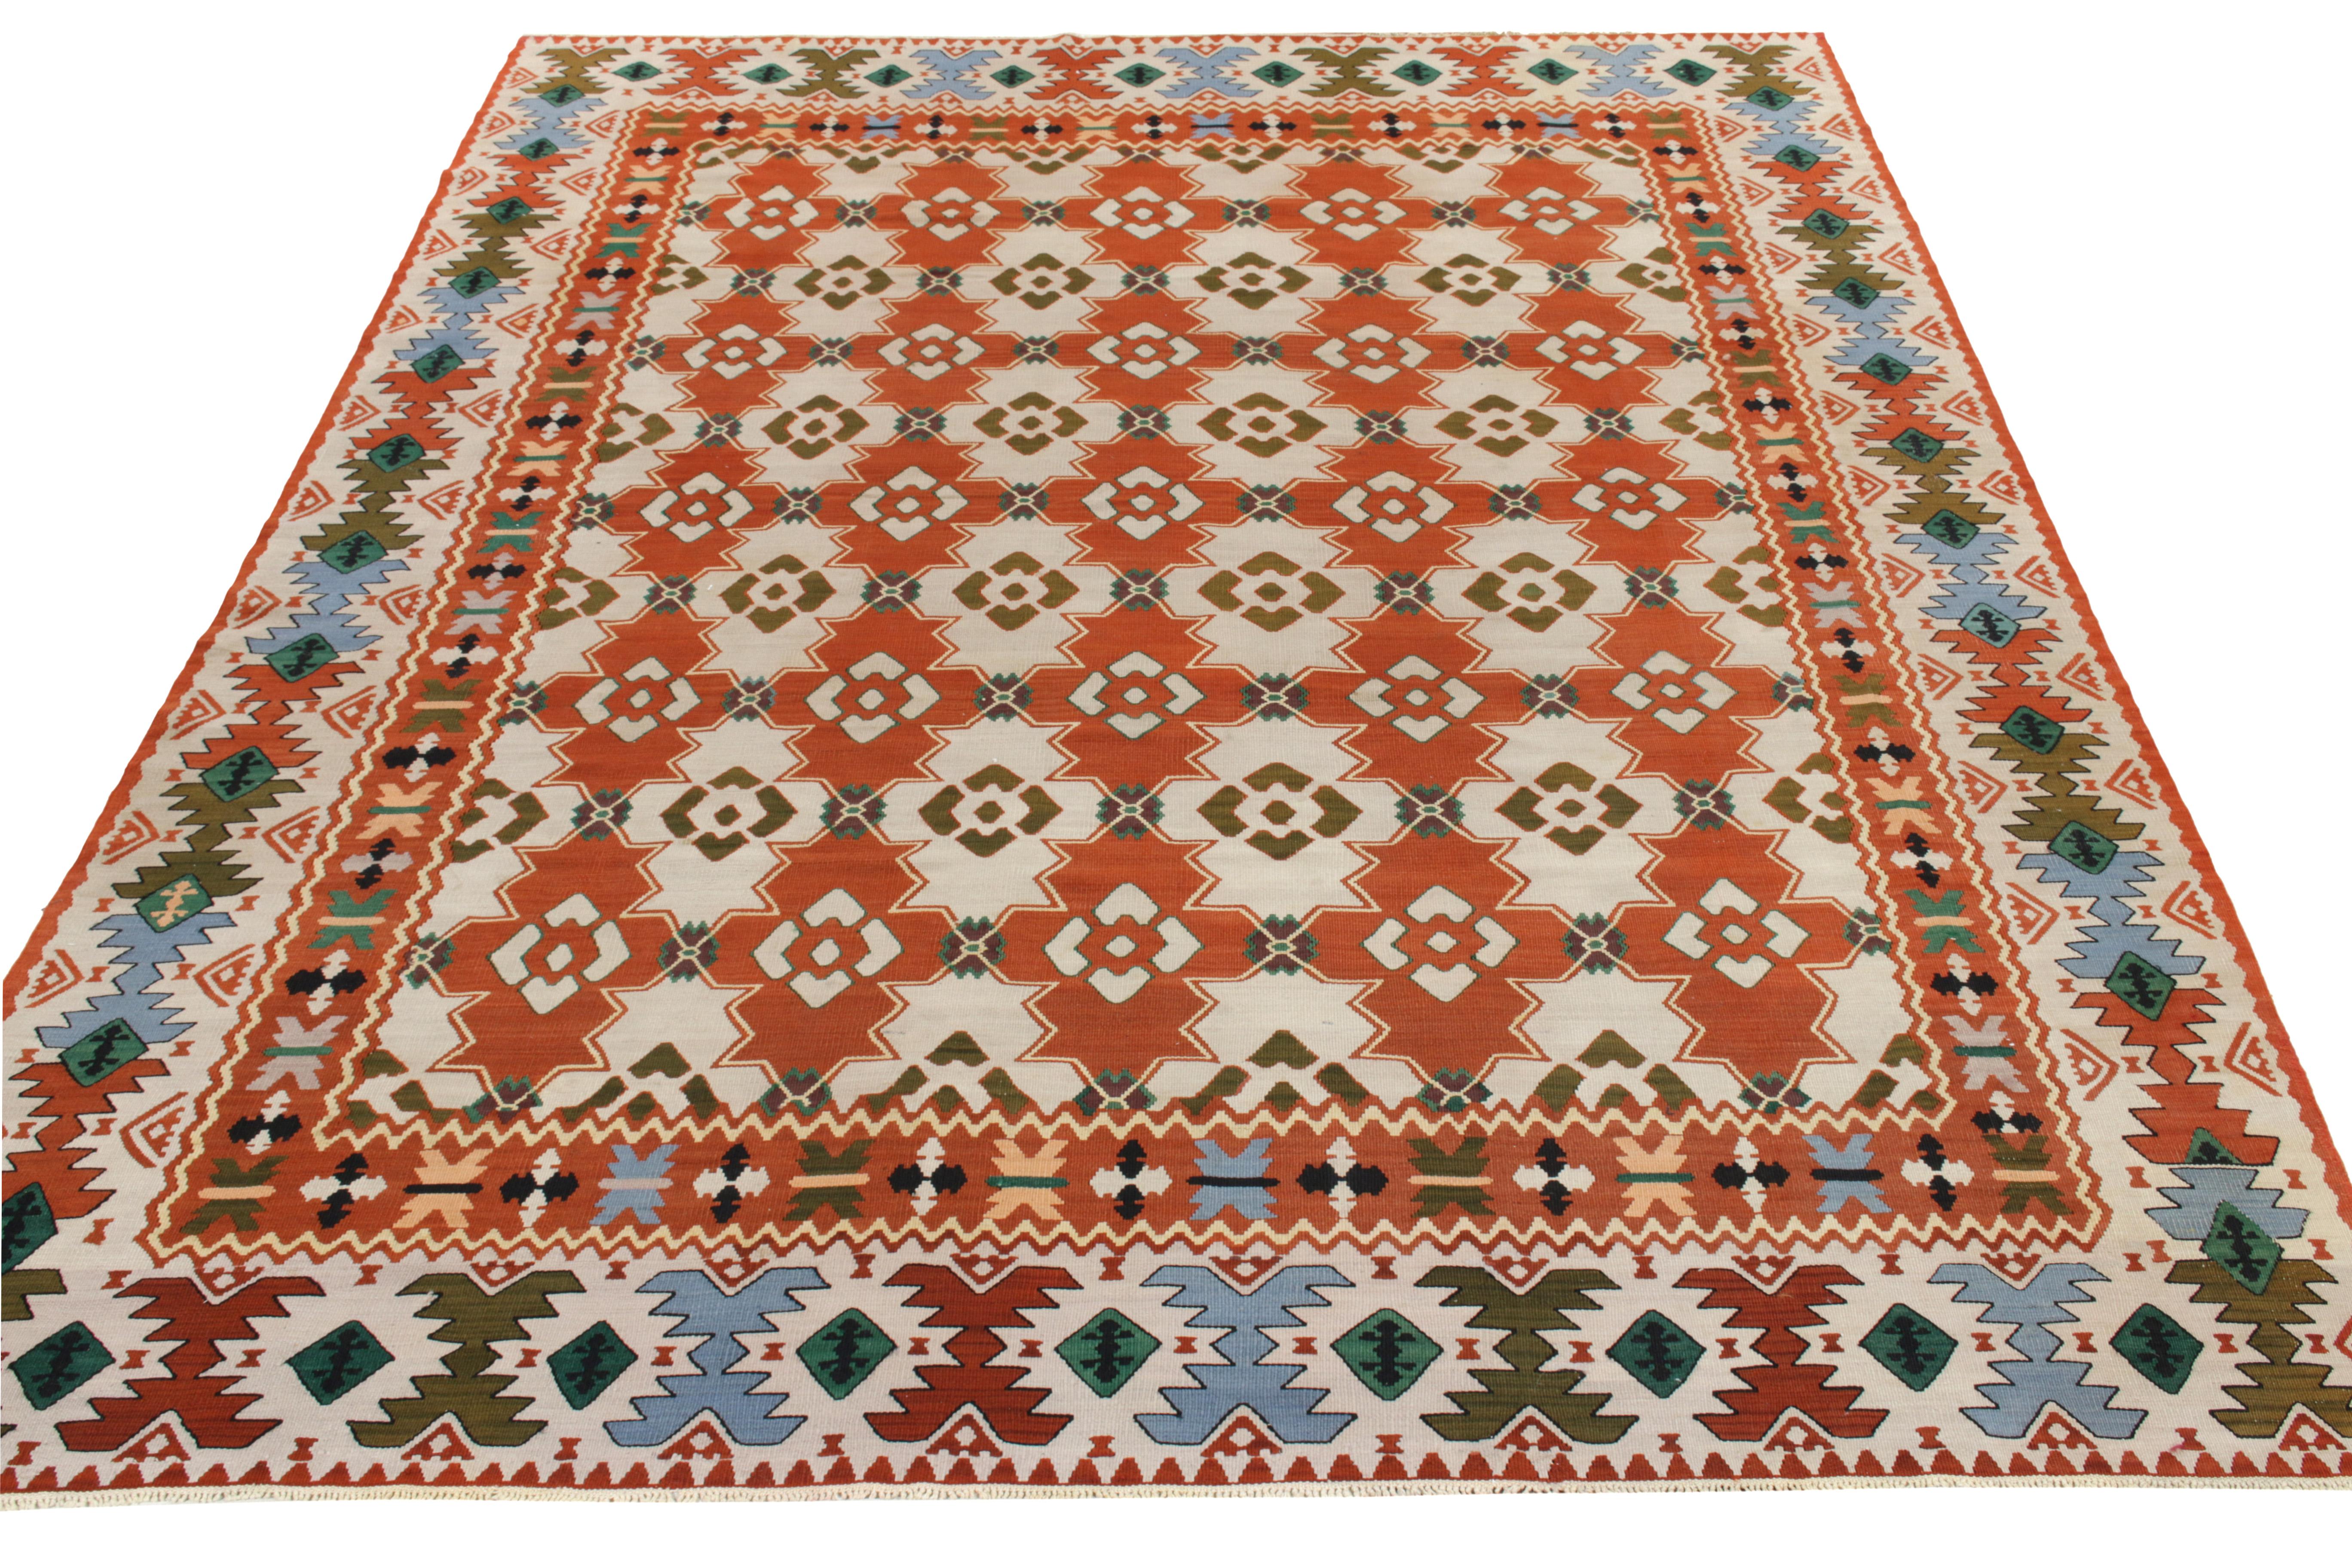 Handwoven in Turkey circa 1950-1960, a vibrant vintage flatweave rug enjoying nomadic sensibilities—entering our coveted Kilim & Flatweave collection. The field features a tribal geometric pattern in bright tangerine & stark white sitting